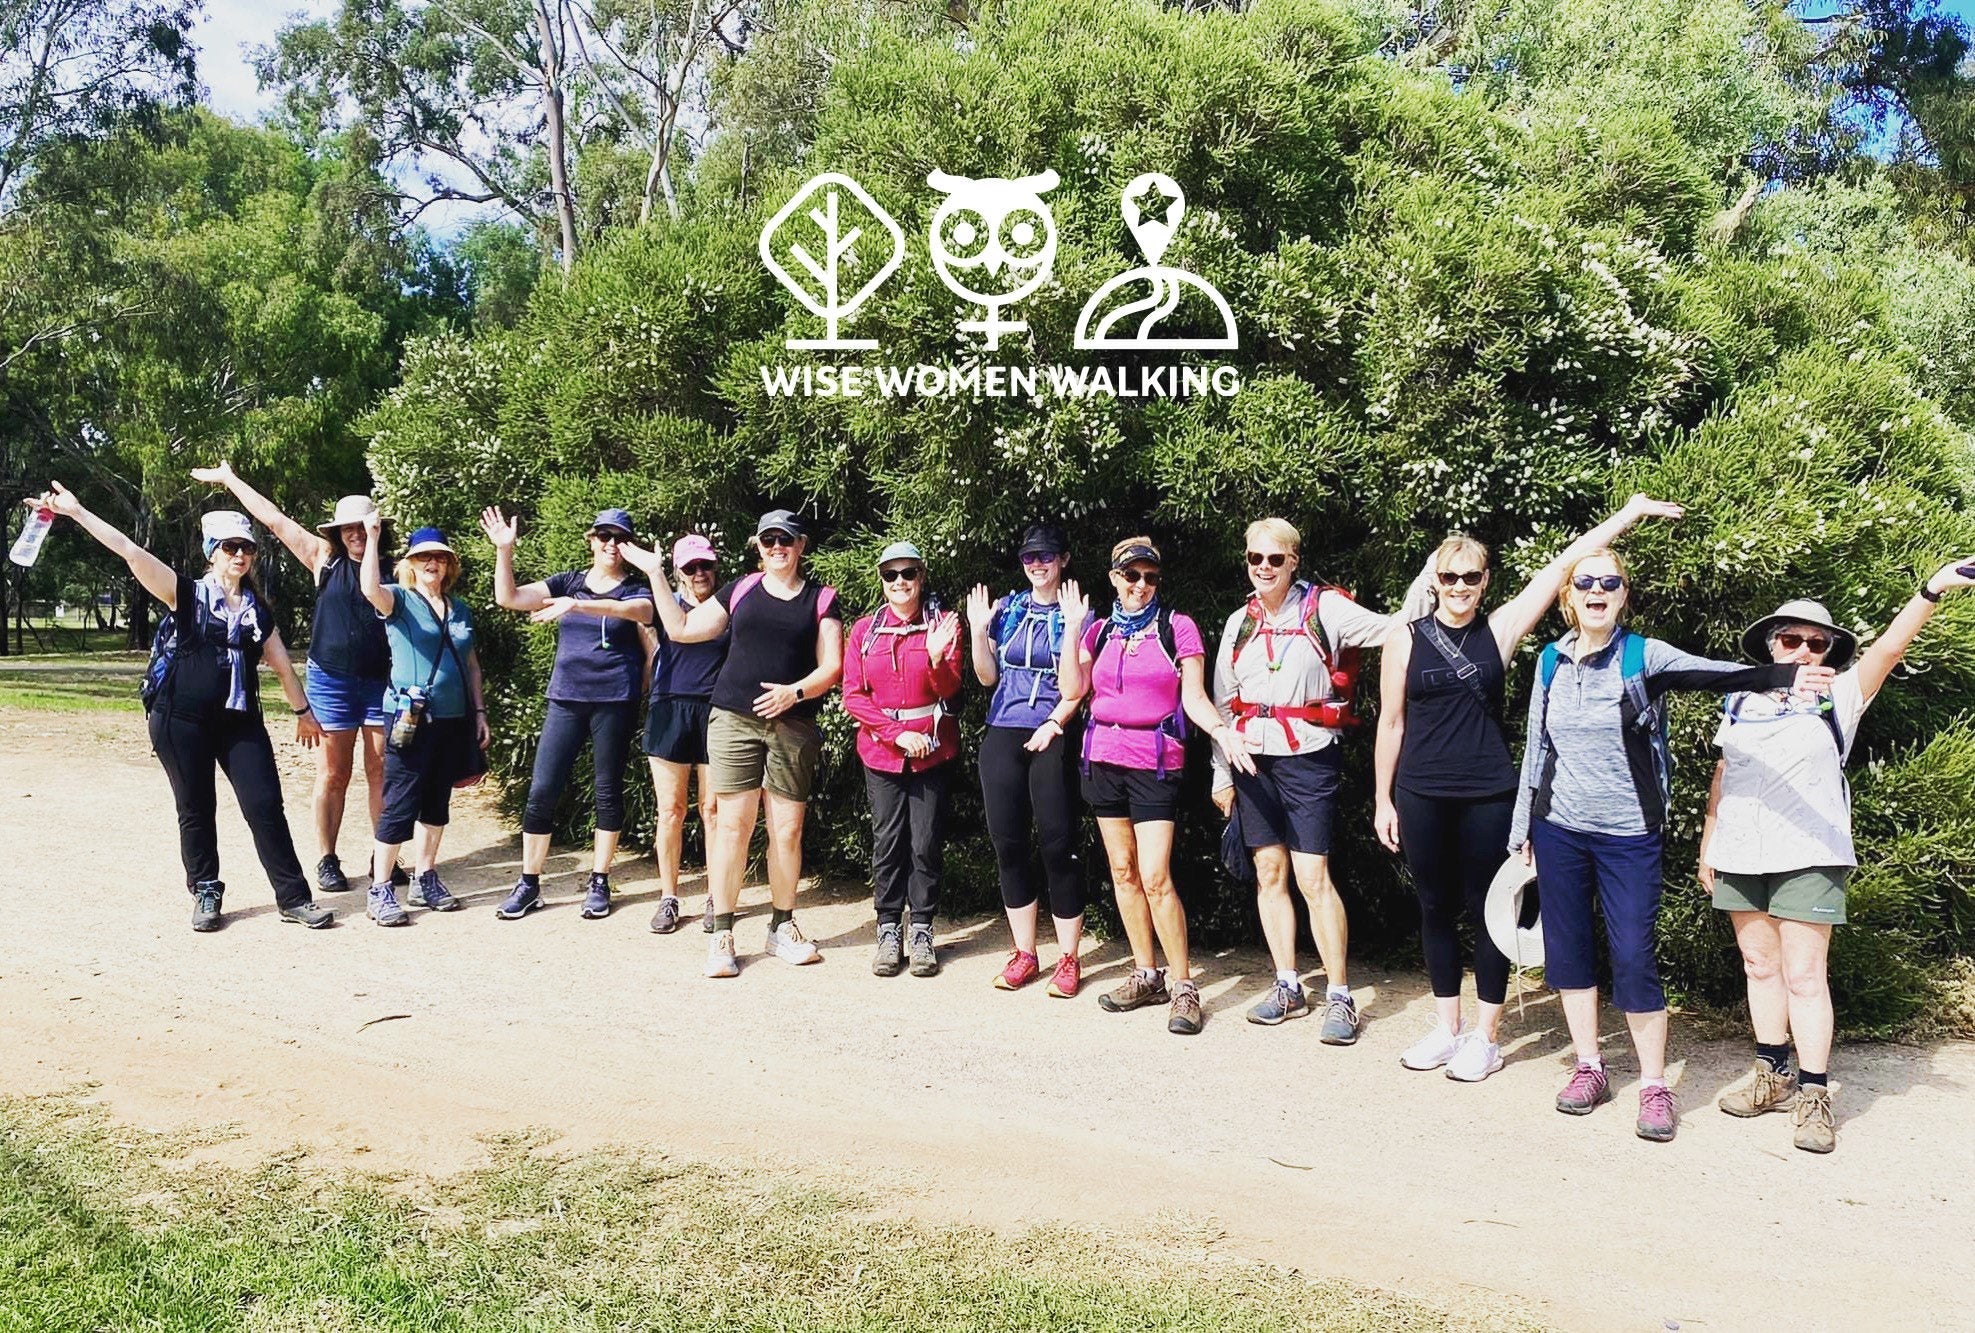 Image of a group of women in hiking gear with their arms raised in celebration, standing in front of shrubbery, text above them that reads Wise Women Walking, along with logos of a tree, an owl and symbol for female combined, and a trail.